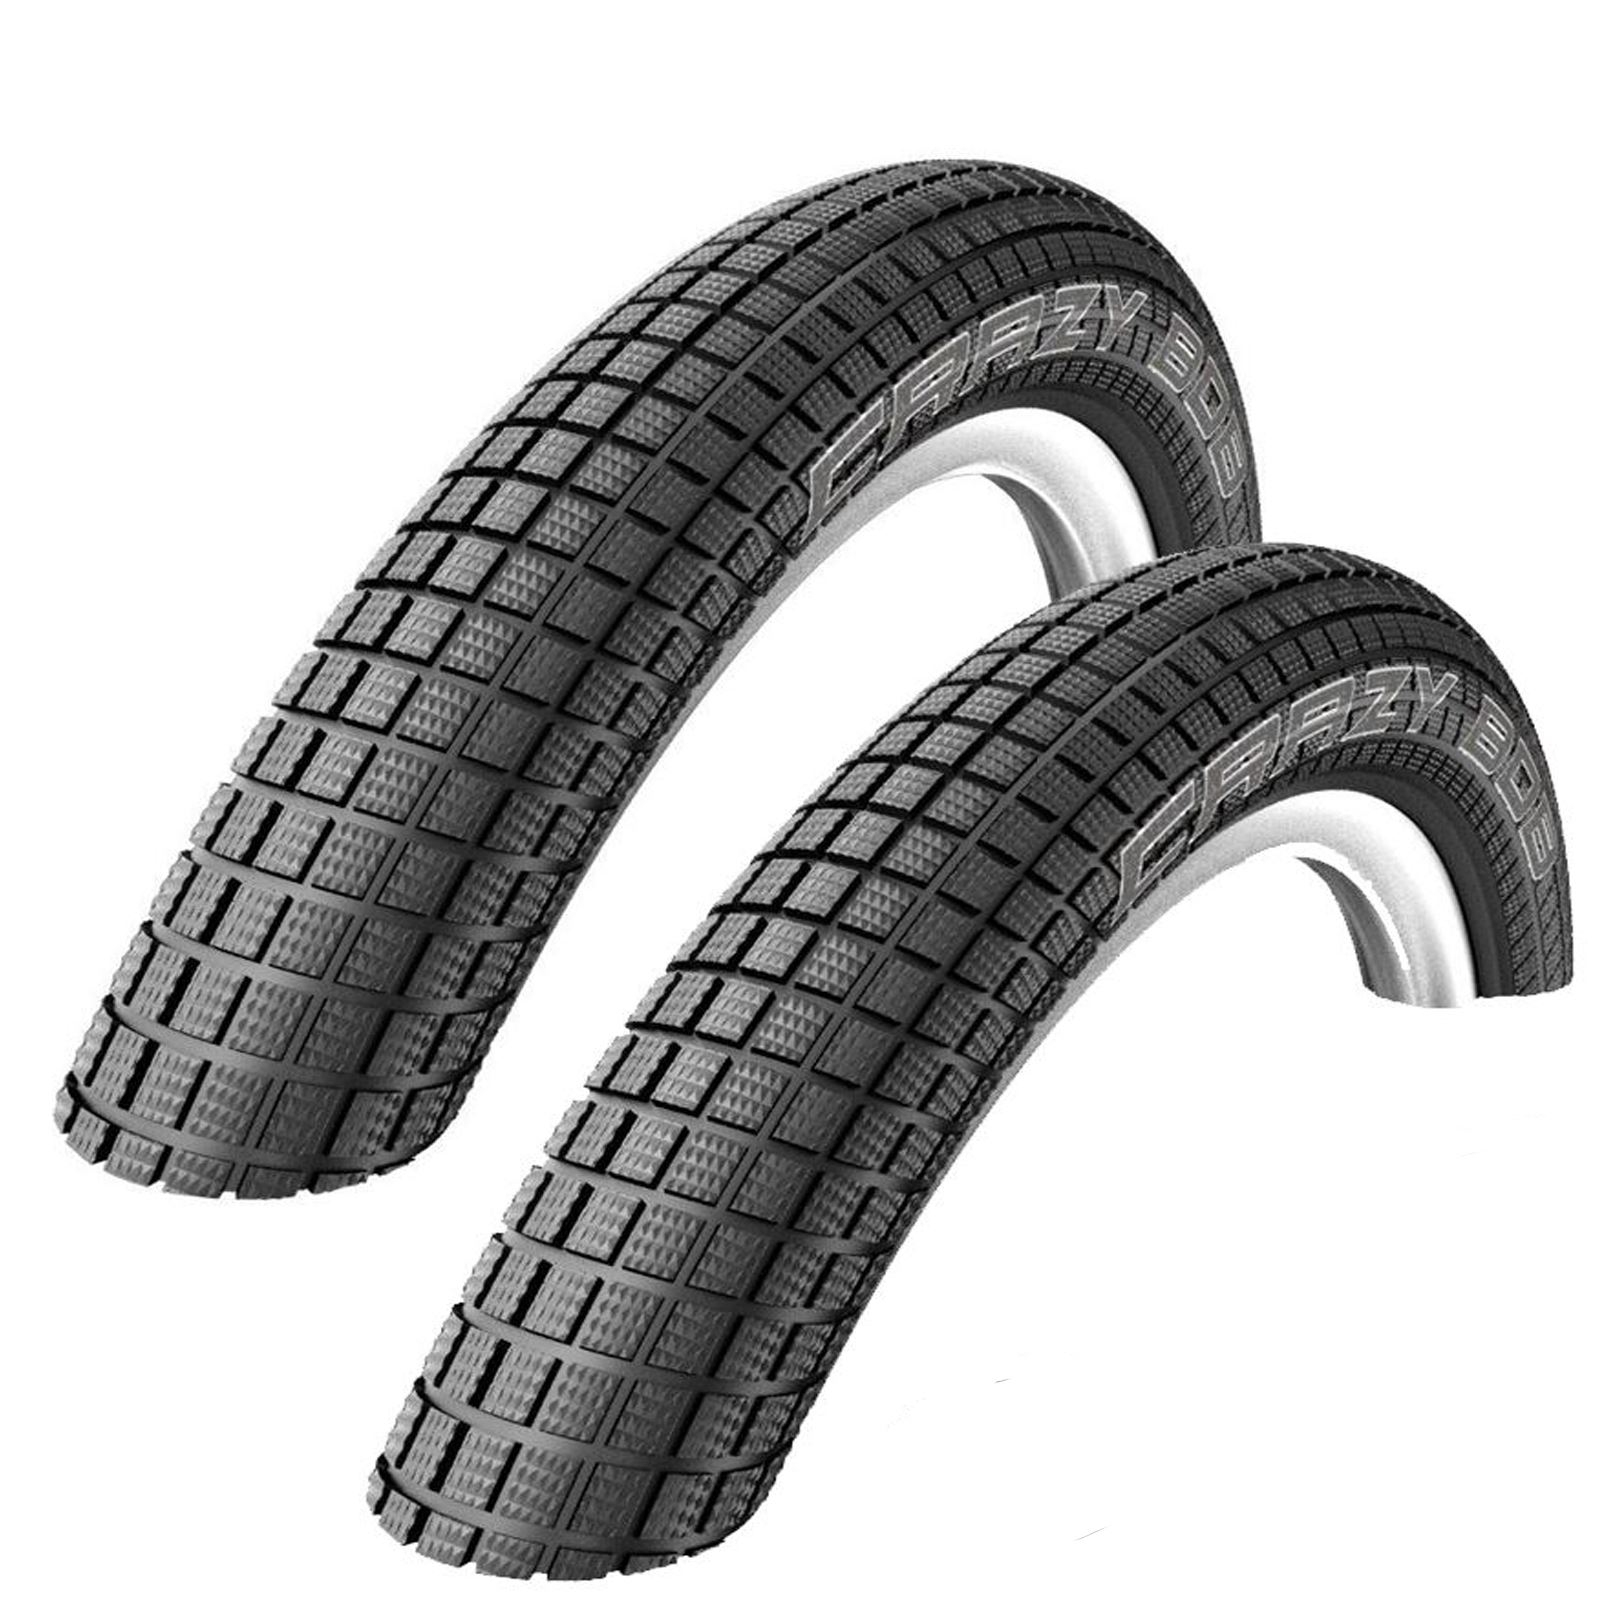 Tyres Schwalbe Crazy Bob Addix 20&amp;quot; X 2.10 Bmx Bike Pair dedans &amp;amp;amp;Quot;Slope&amp;amp;amp;Quot; Of The Line (How Steep The Line Is), X Is The Quantity On 